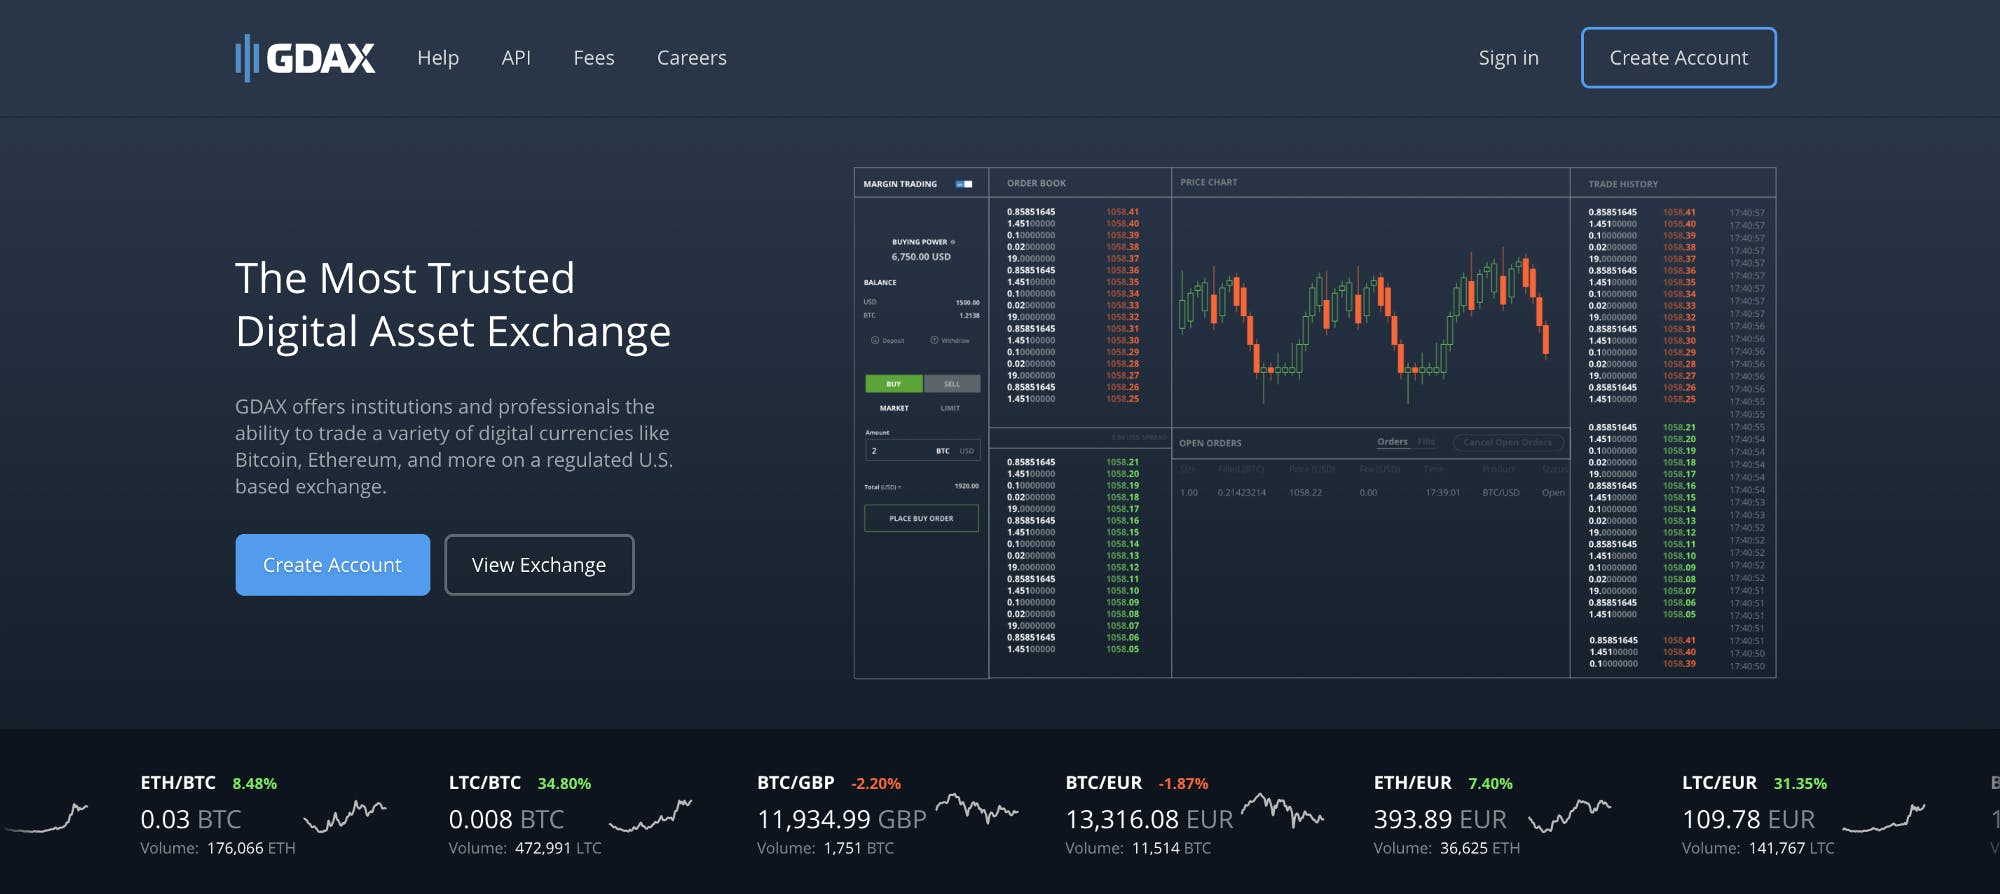 /beginners-guide-to-gdax-an-exchange-of-coinbase-to-trade-btc-eth-and-ltc-e418fd1acd1b feature image